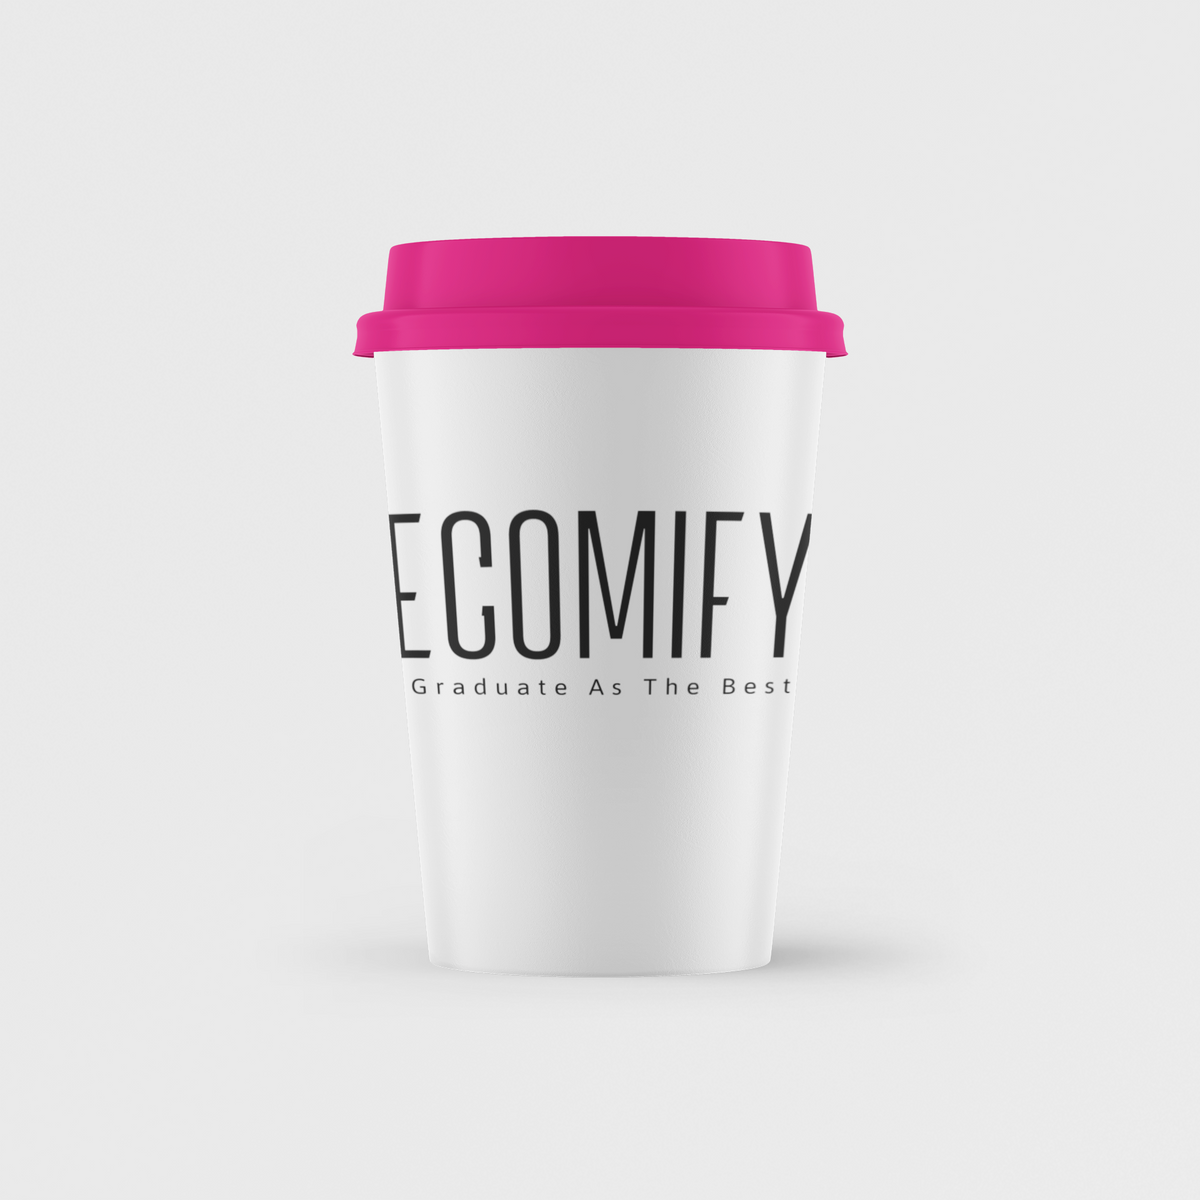 Ecomify Coffee Craze Cup